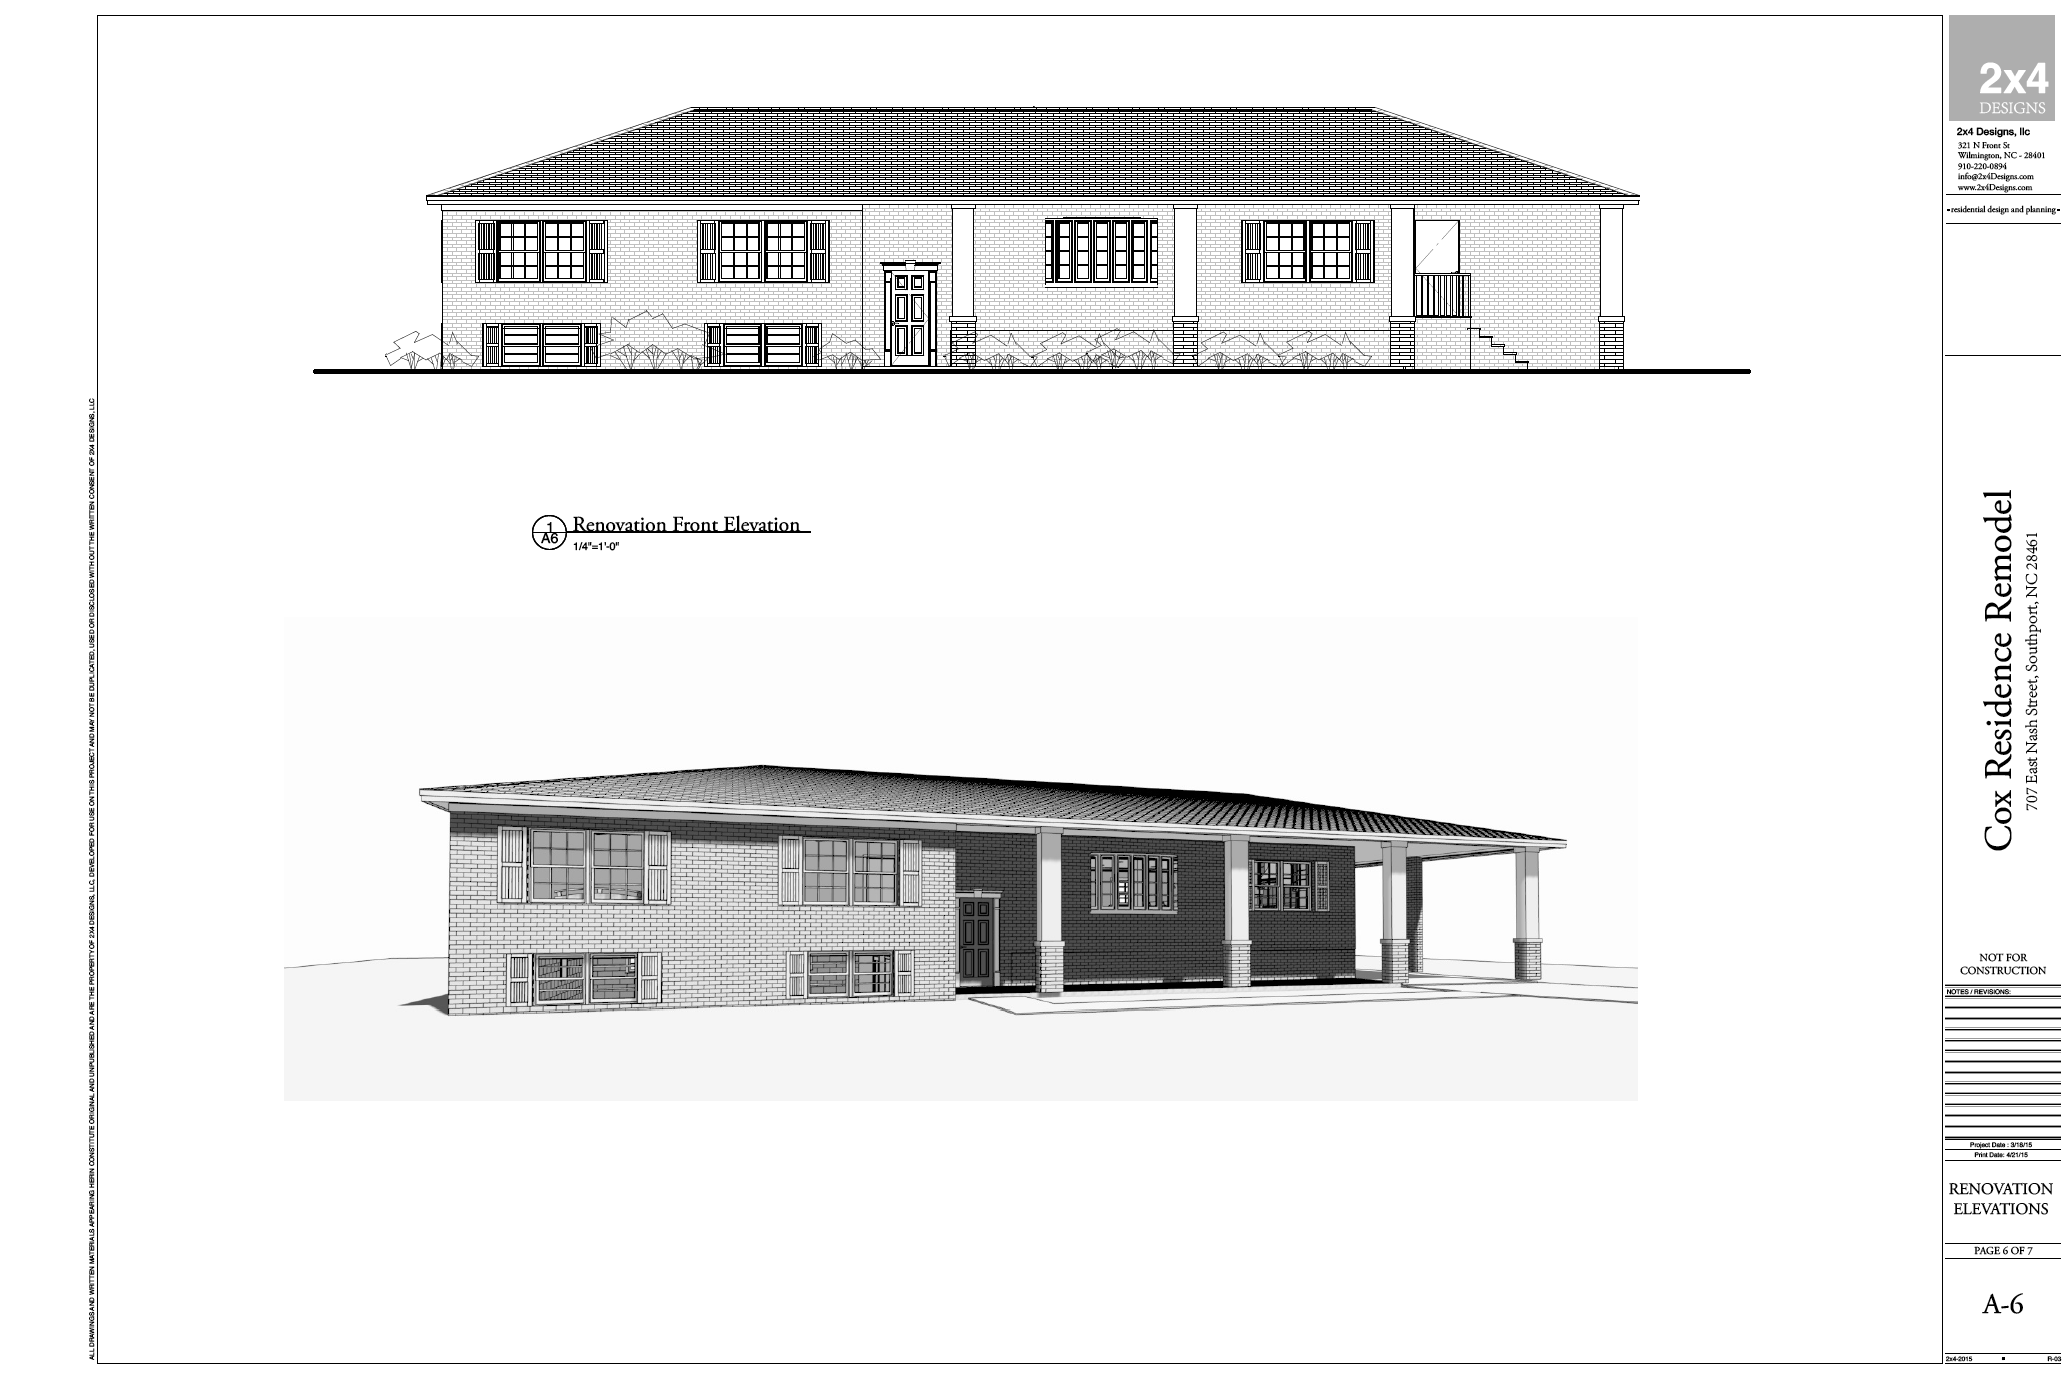 PROPOSED FRONT ELEVATION